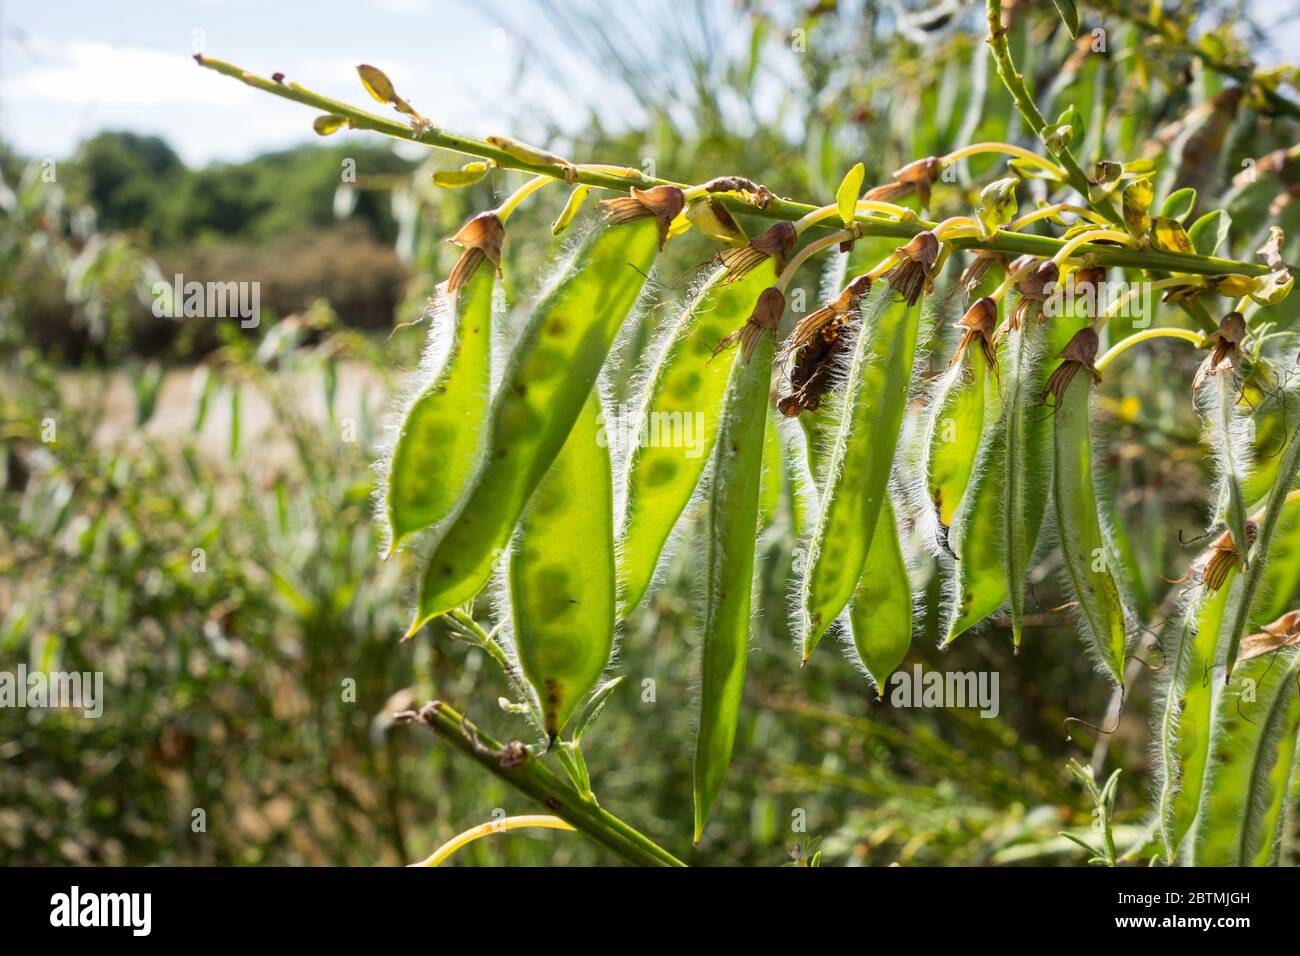 Seed pods or legumes of Cytisus scoparius or Scotch broom Stock Photo -  Alamy